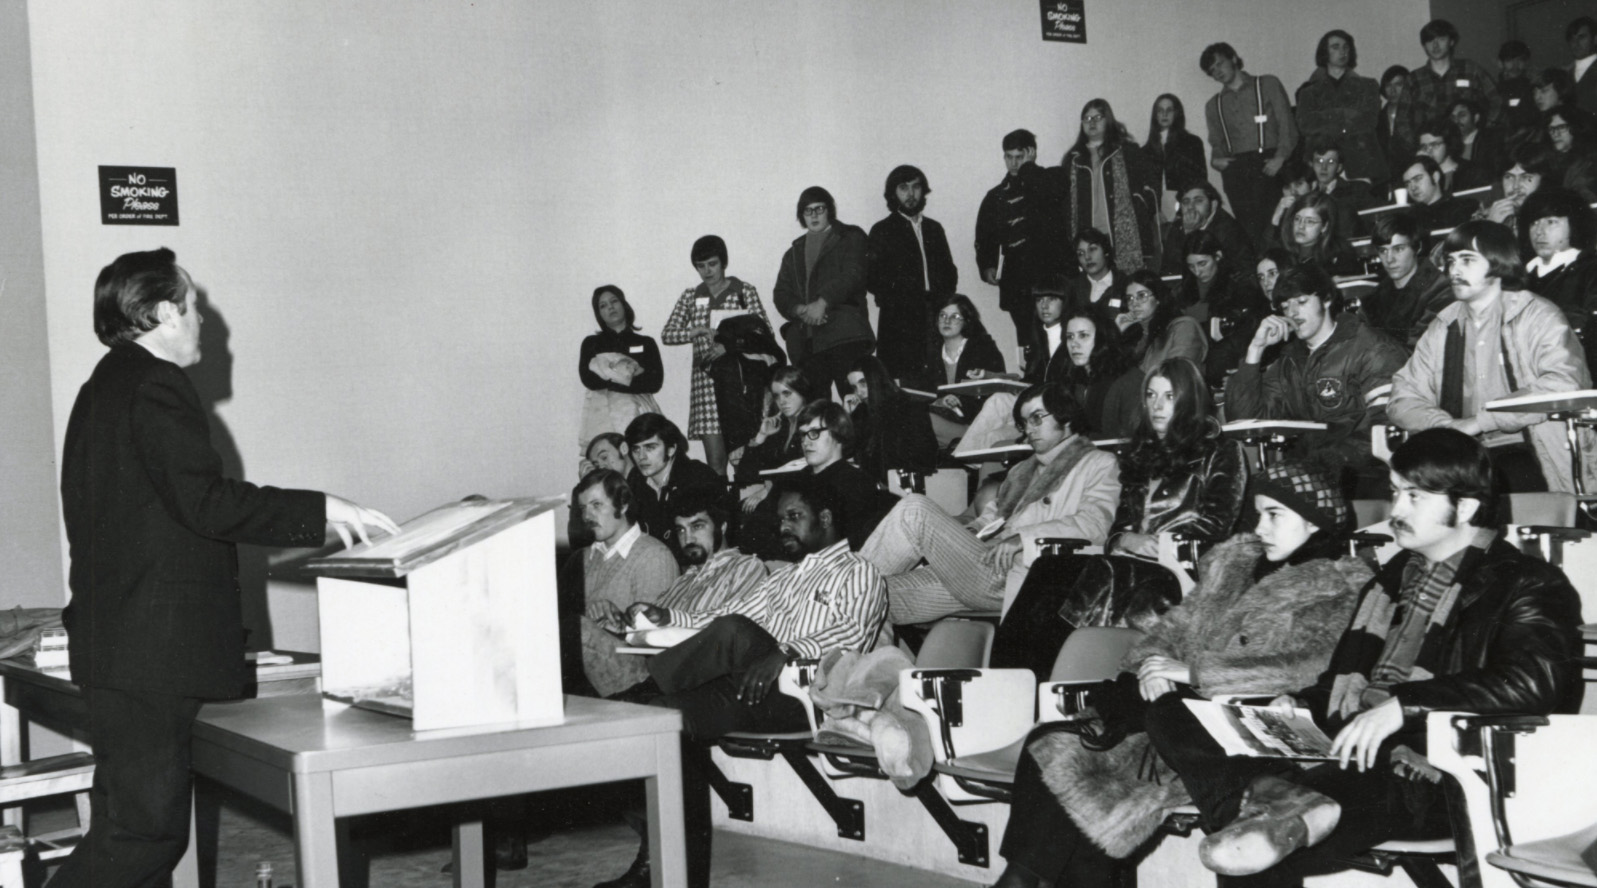 Professor lecturing to a crowded auditorium